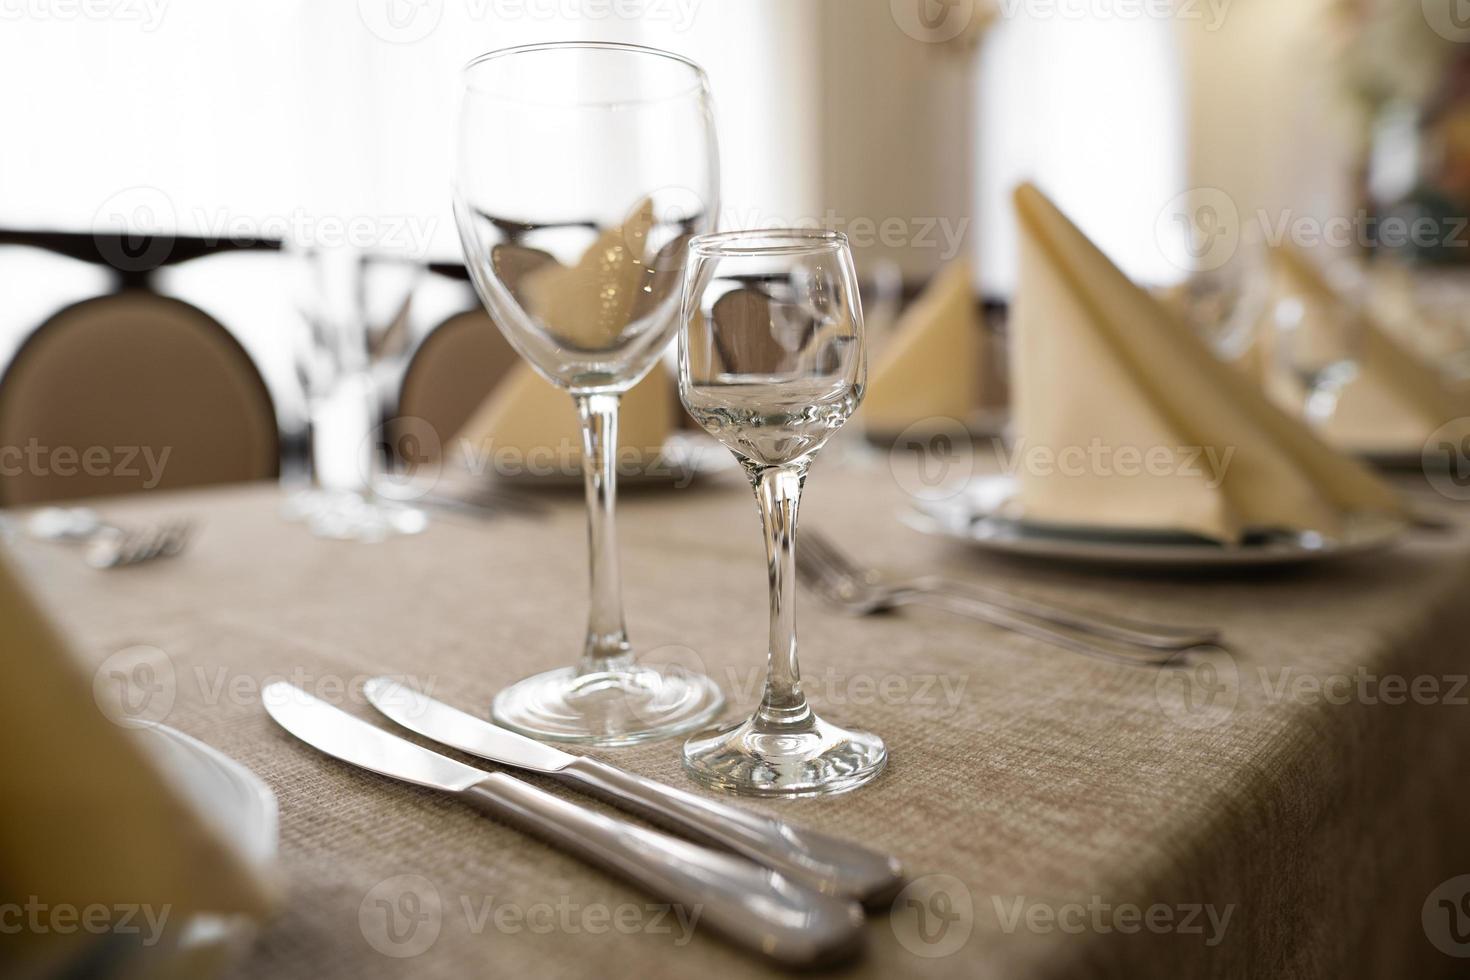 empty goblets and other cutlery are served on the festive table. photo